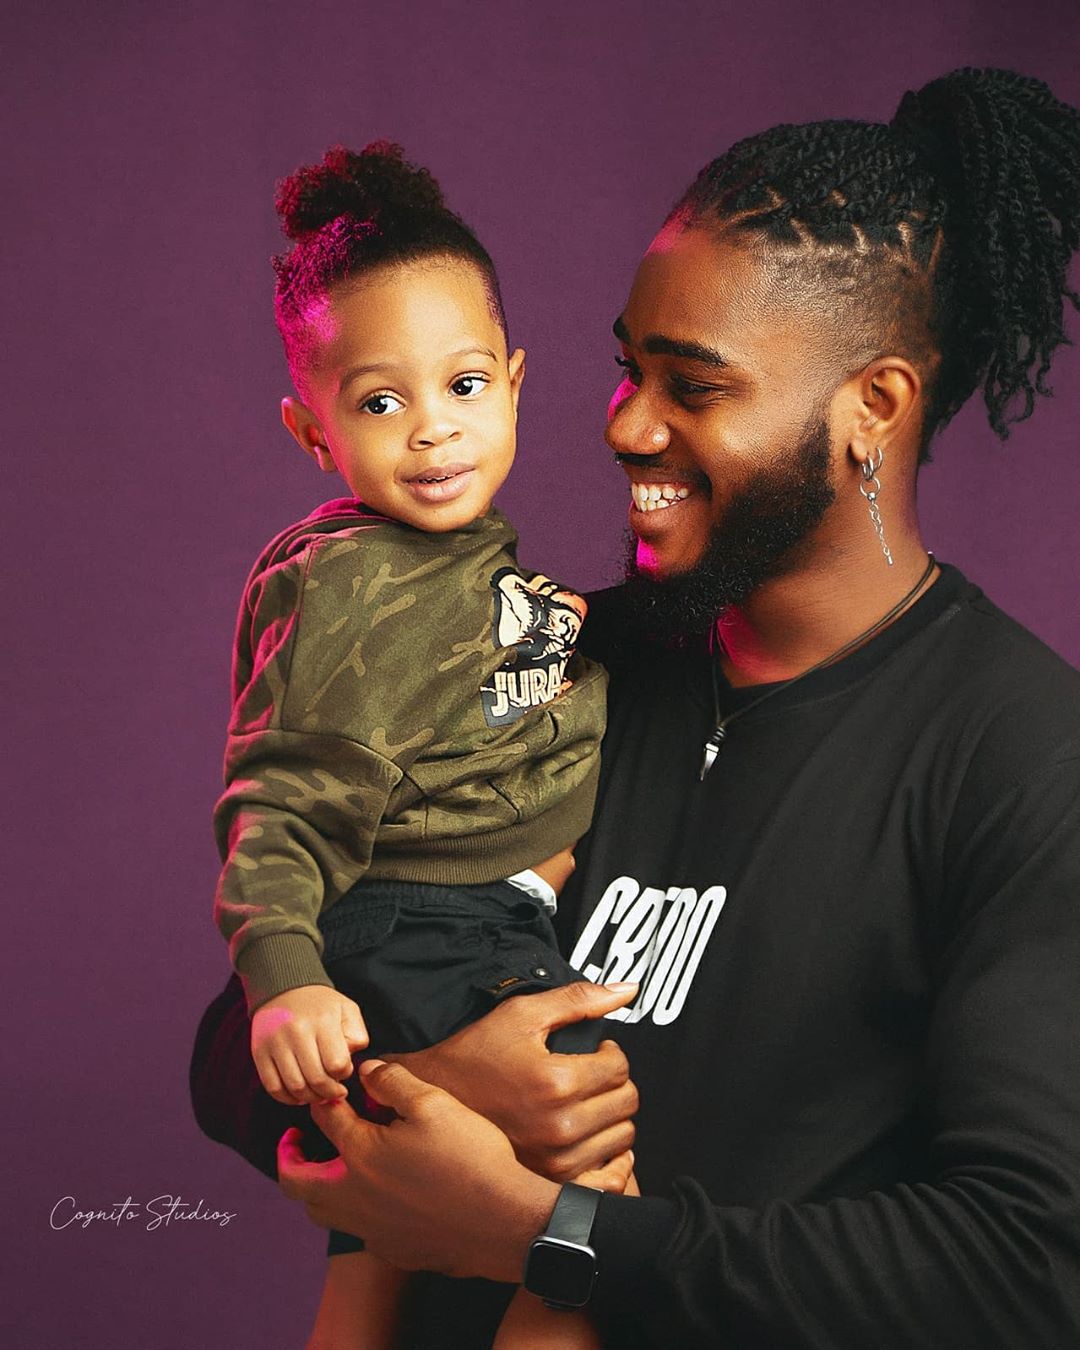 Praise Nelson And Son Looking Amazing In New Pictures 12379596_itzpraise1196572123721068804625347453107420811708587n_jpega63be8f6f3370320b2adc5181b3a8773